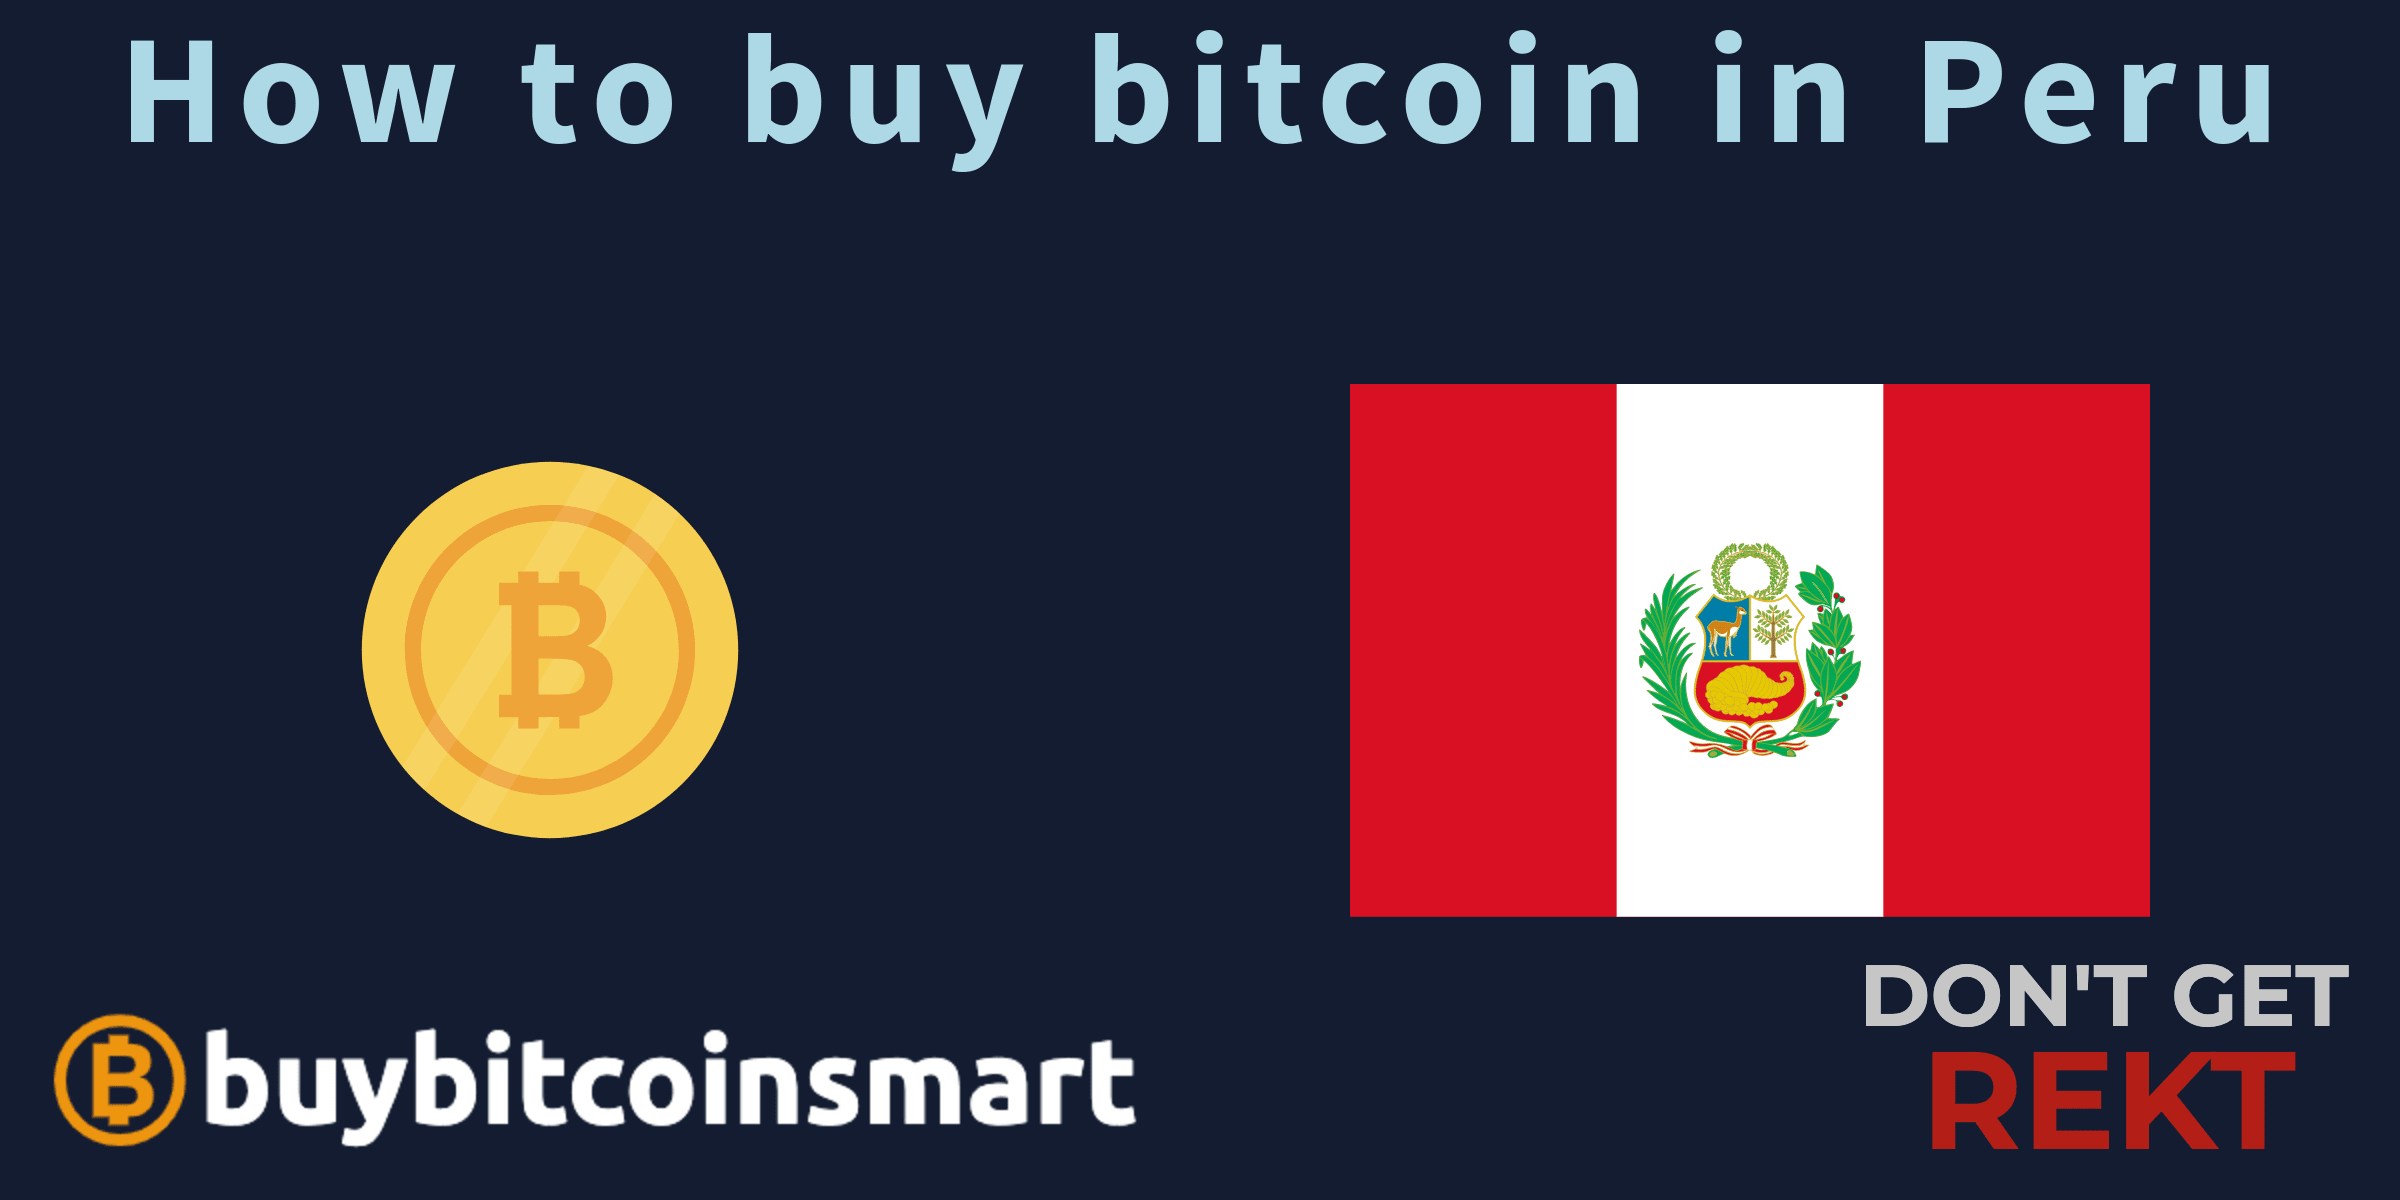 How to buy bitcoin in Peru